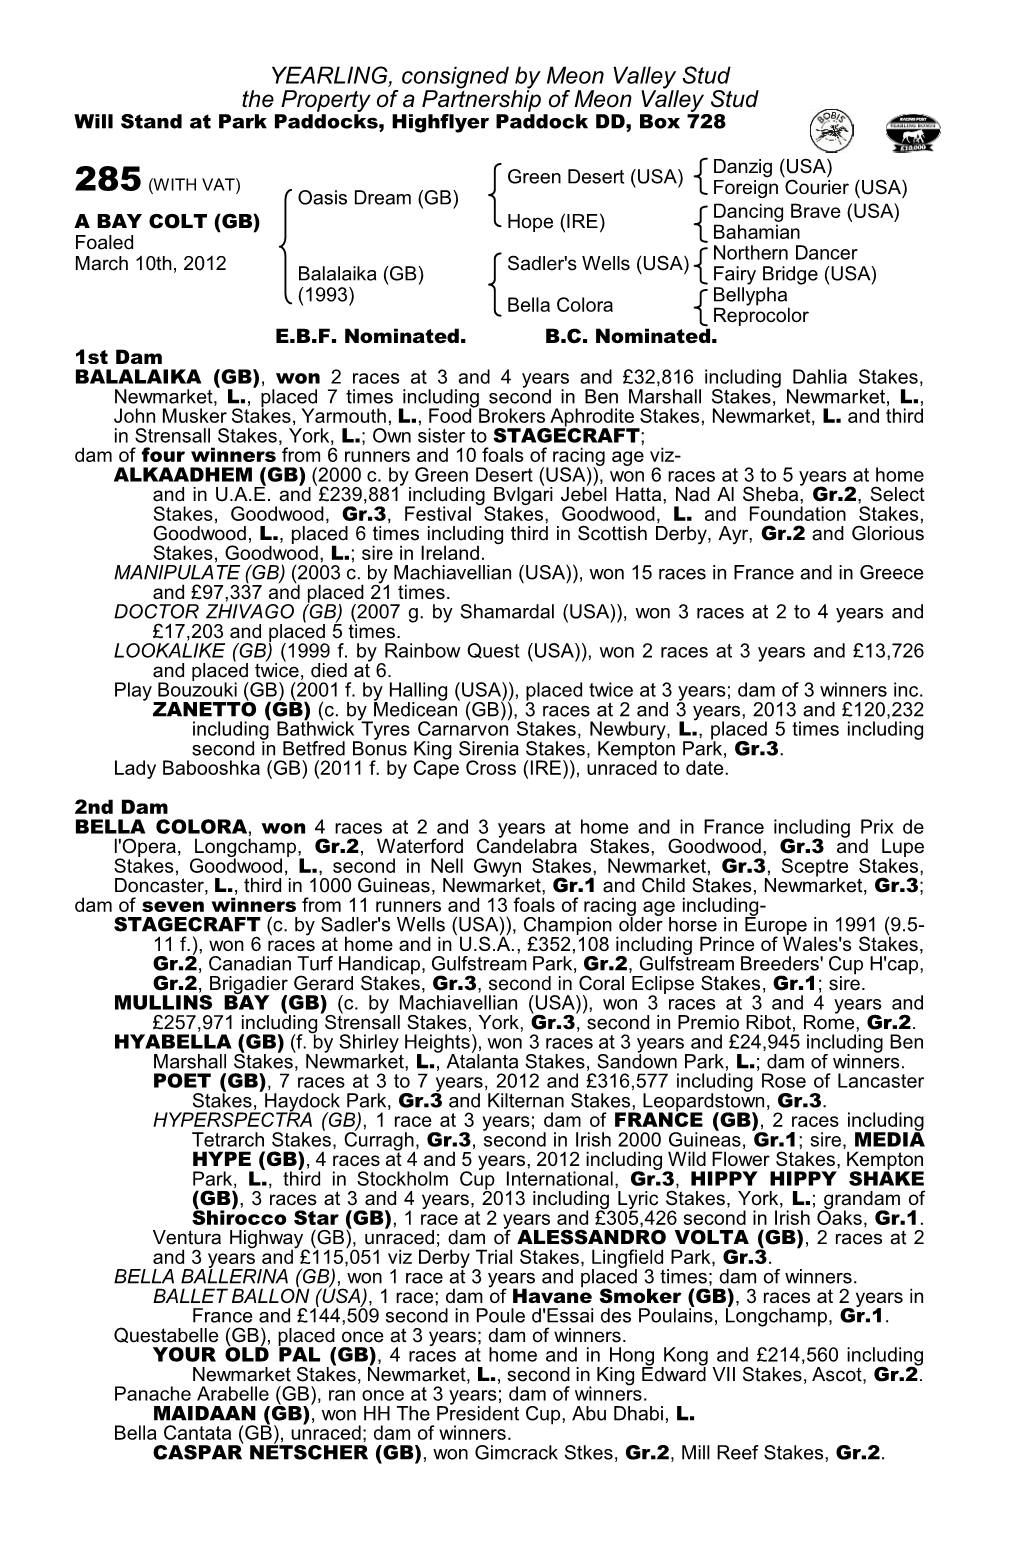 YEARLING, Consigned by Meon Valley Stud the Property of a Partnership of Meon Valley Stud Will Stand at Park Paddocks, Highflyer Paddock DD, Box 728